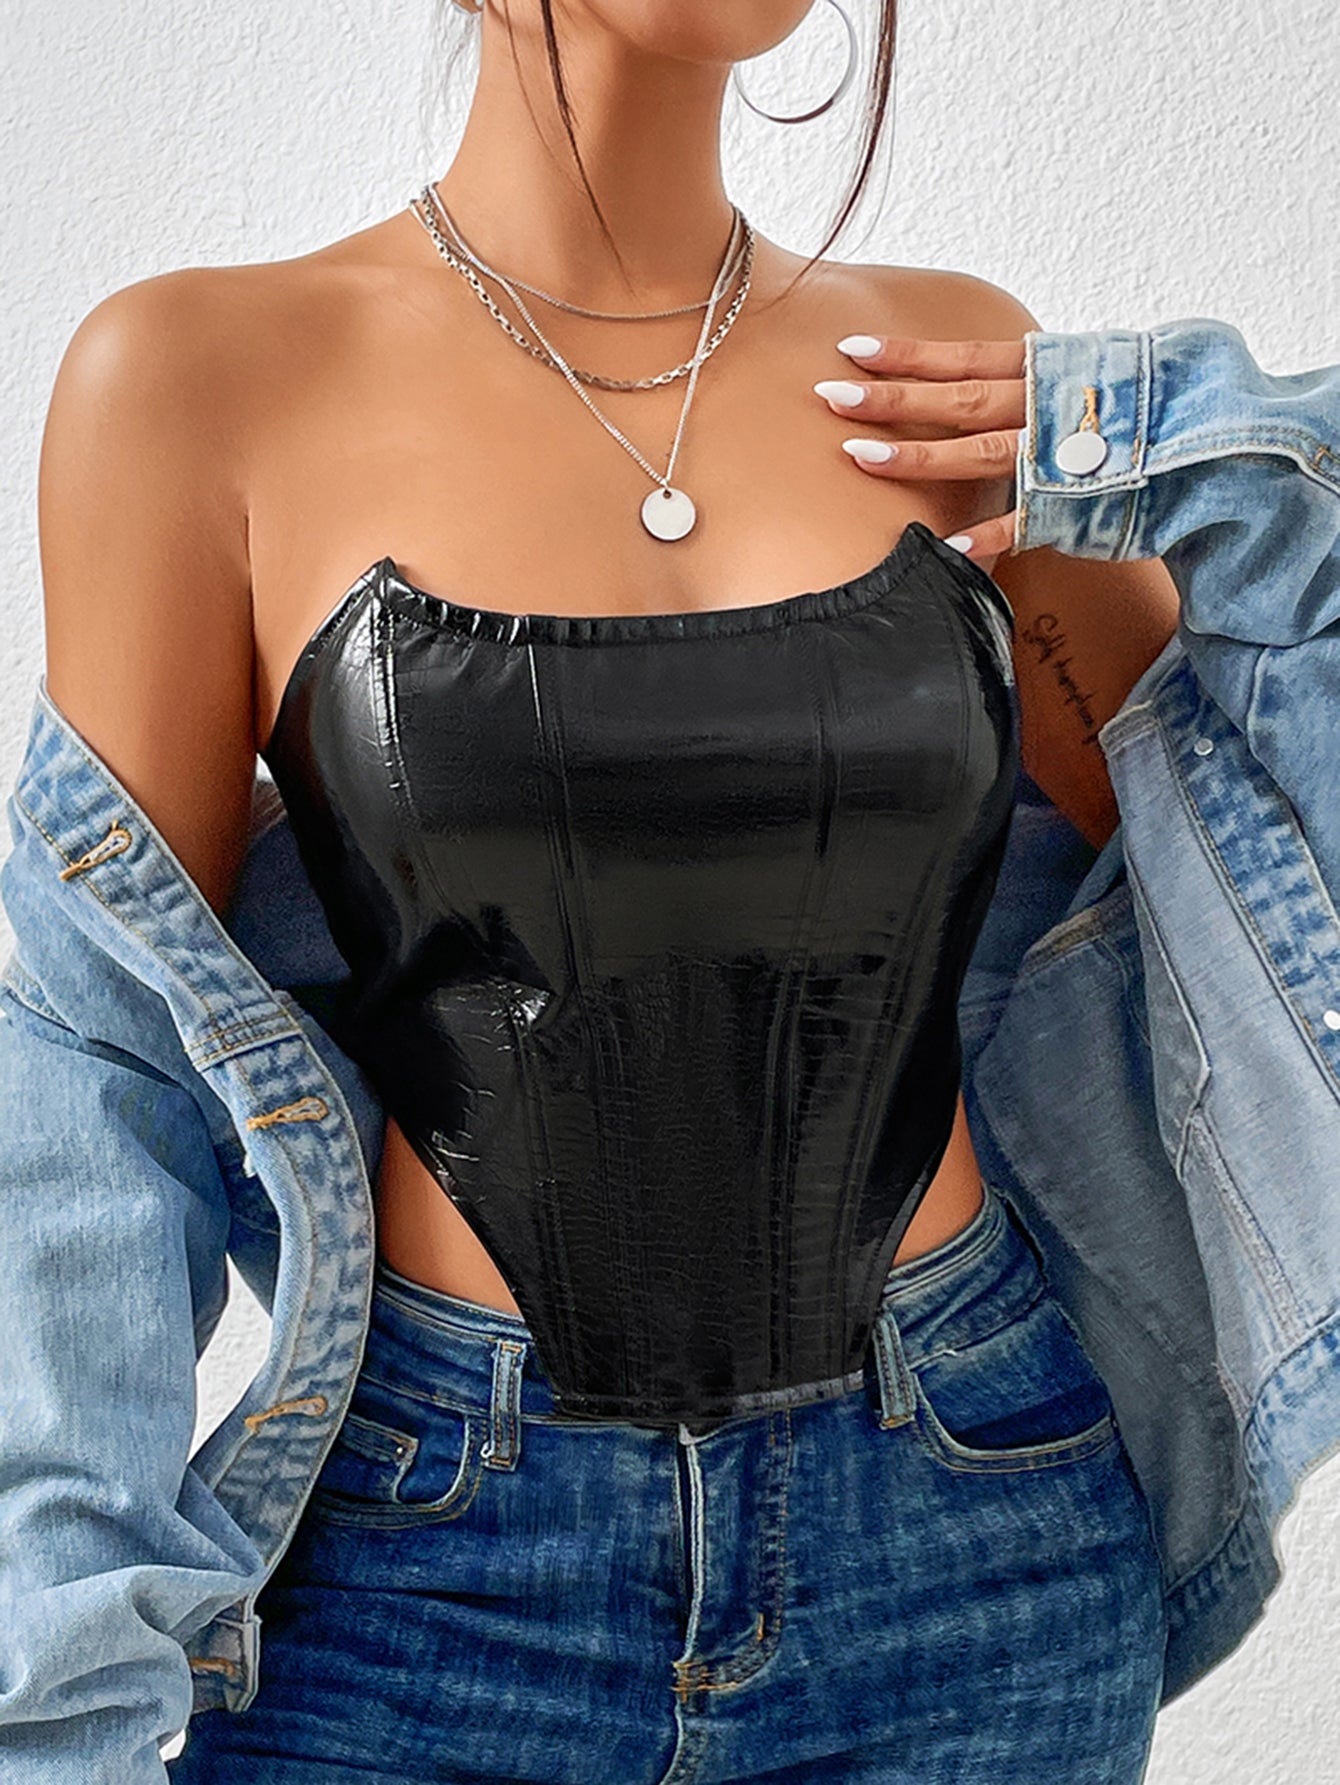 Lace-Up Shiny Black Leather Bustier Stylish Inspired Crop Top